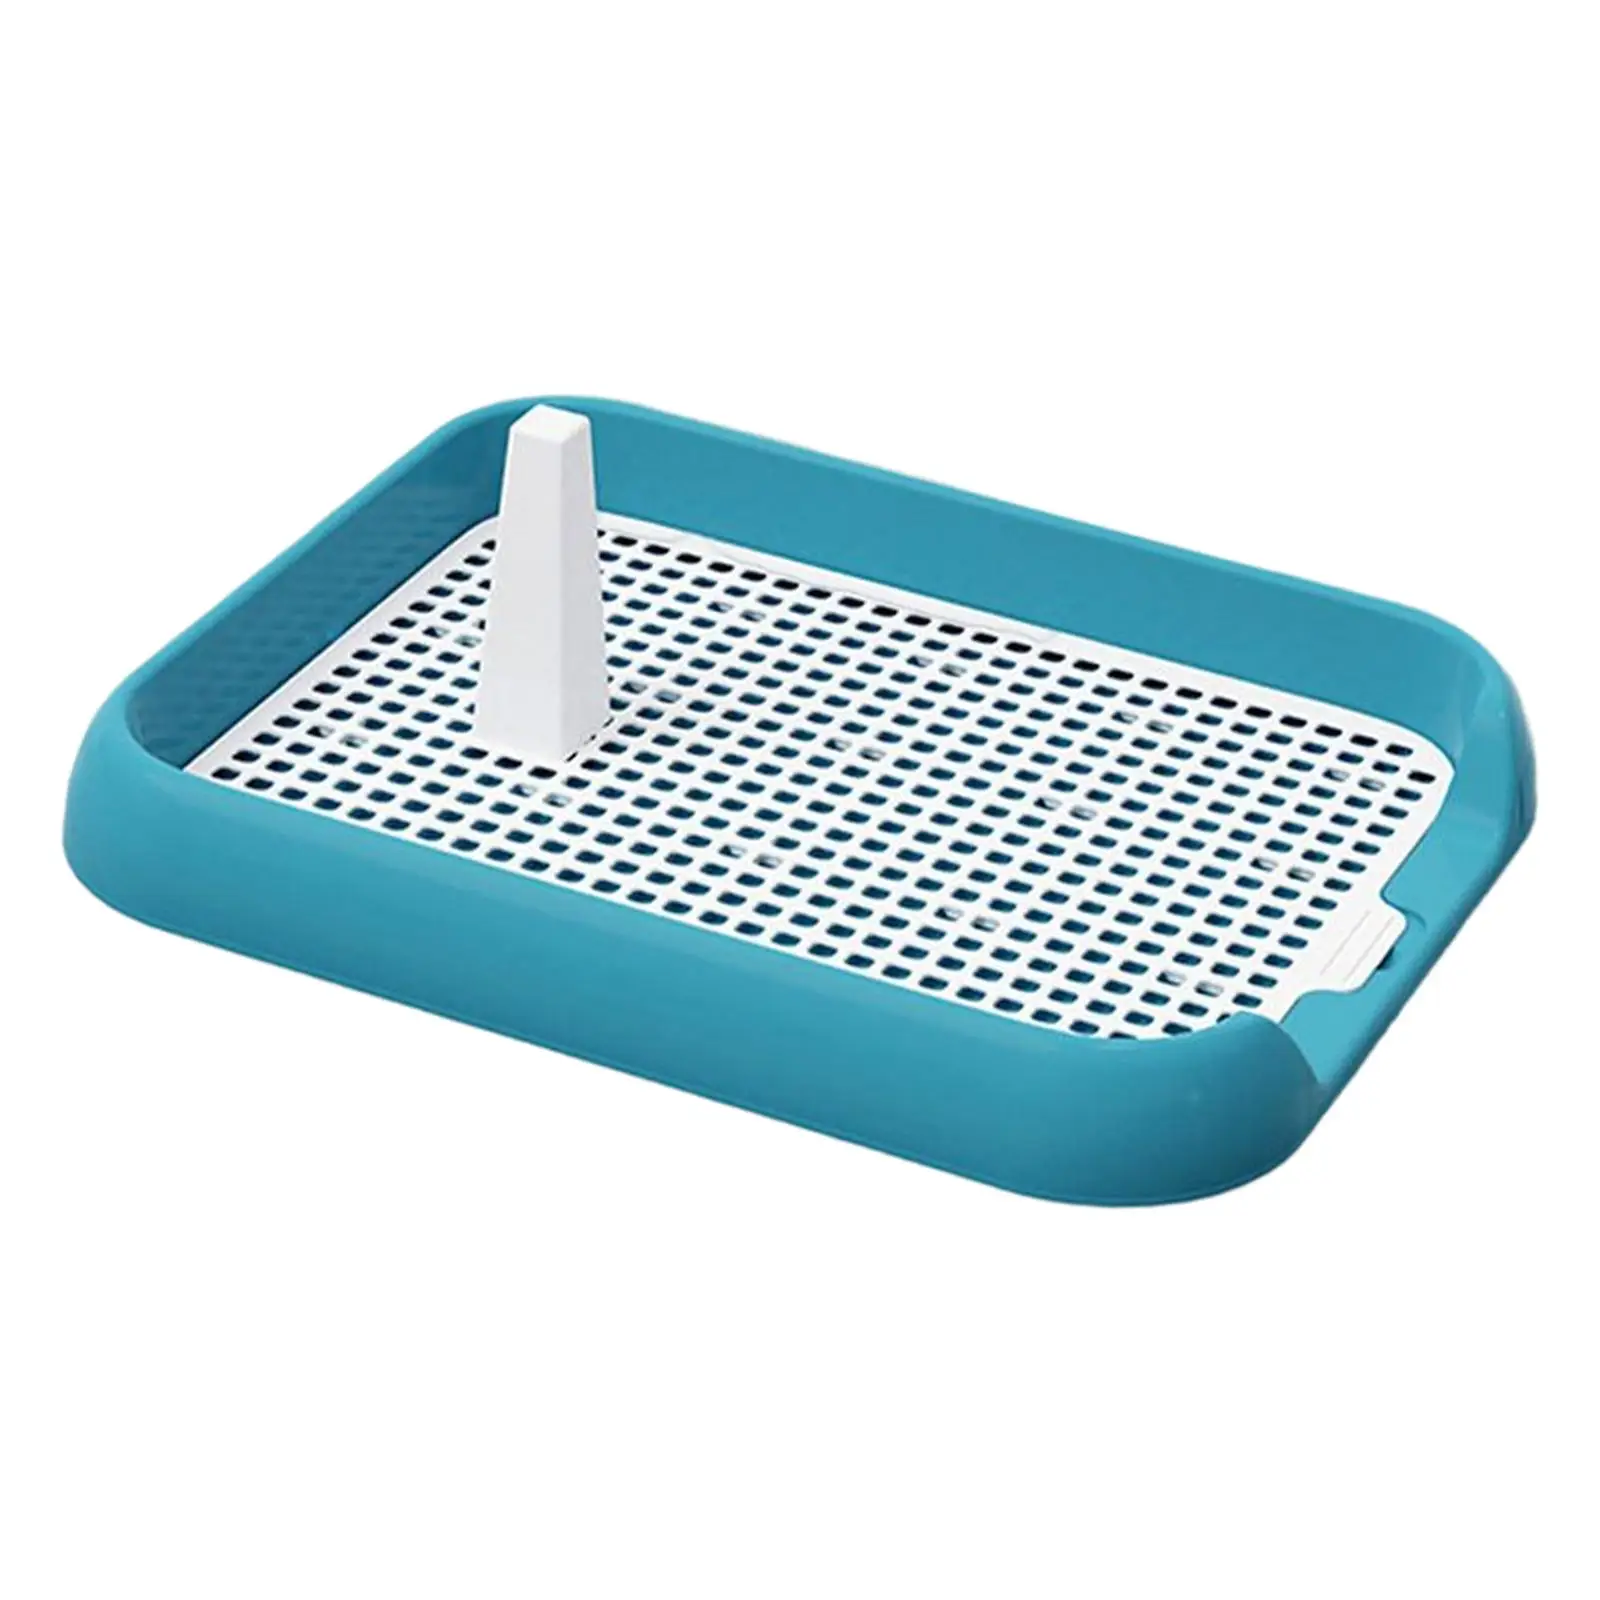 Pet Dog Training Toilet Tray Portable Cat with Column Washable Pet Toilet Litter Tray Accessories for Outdoor Bathroom Indoor